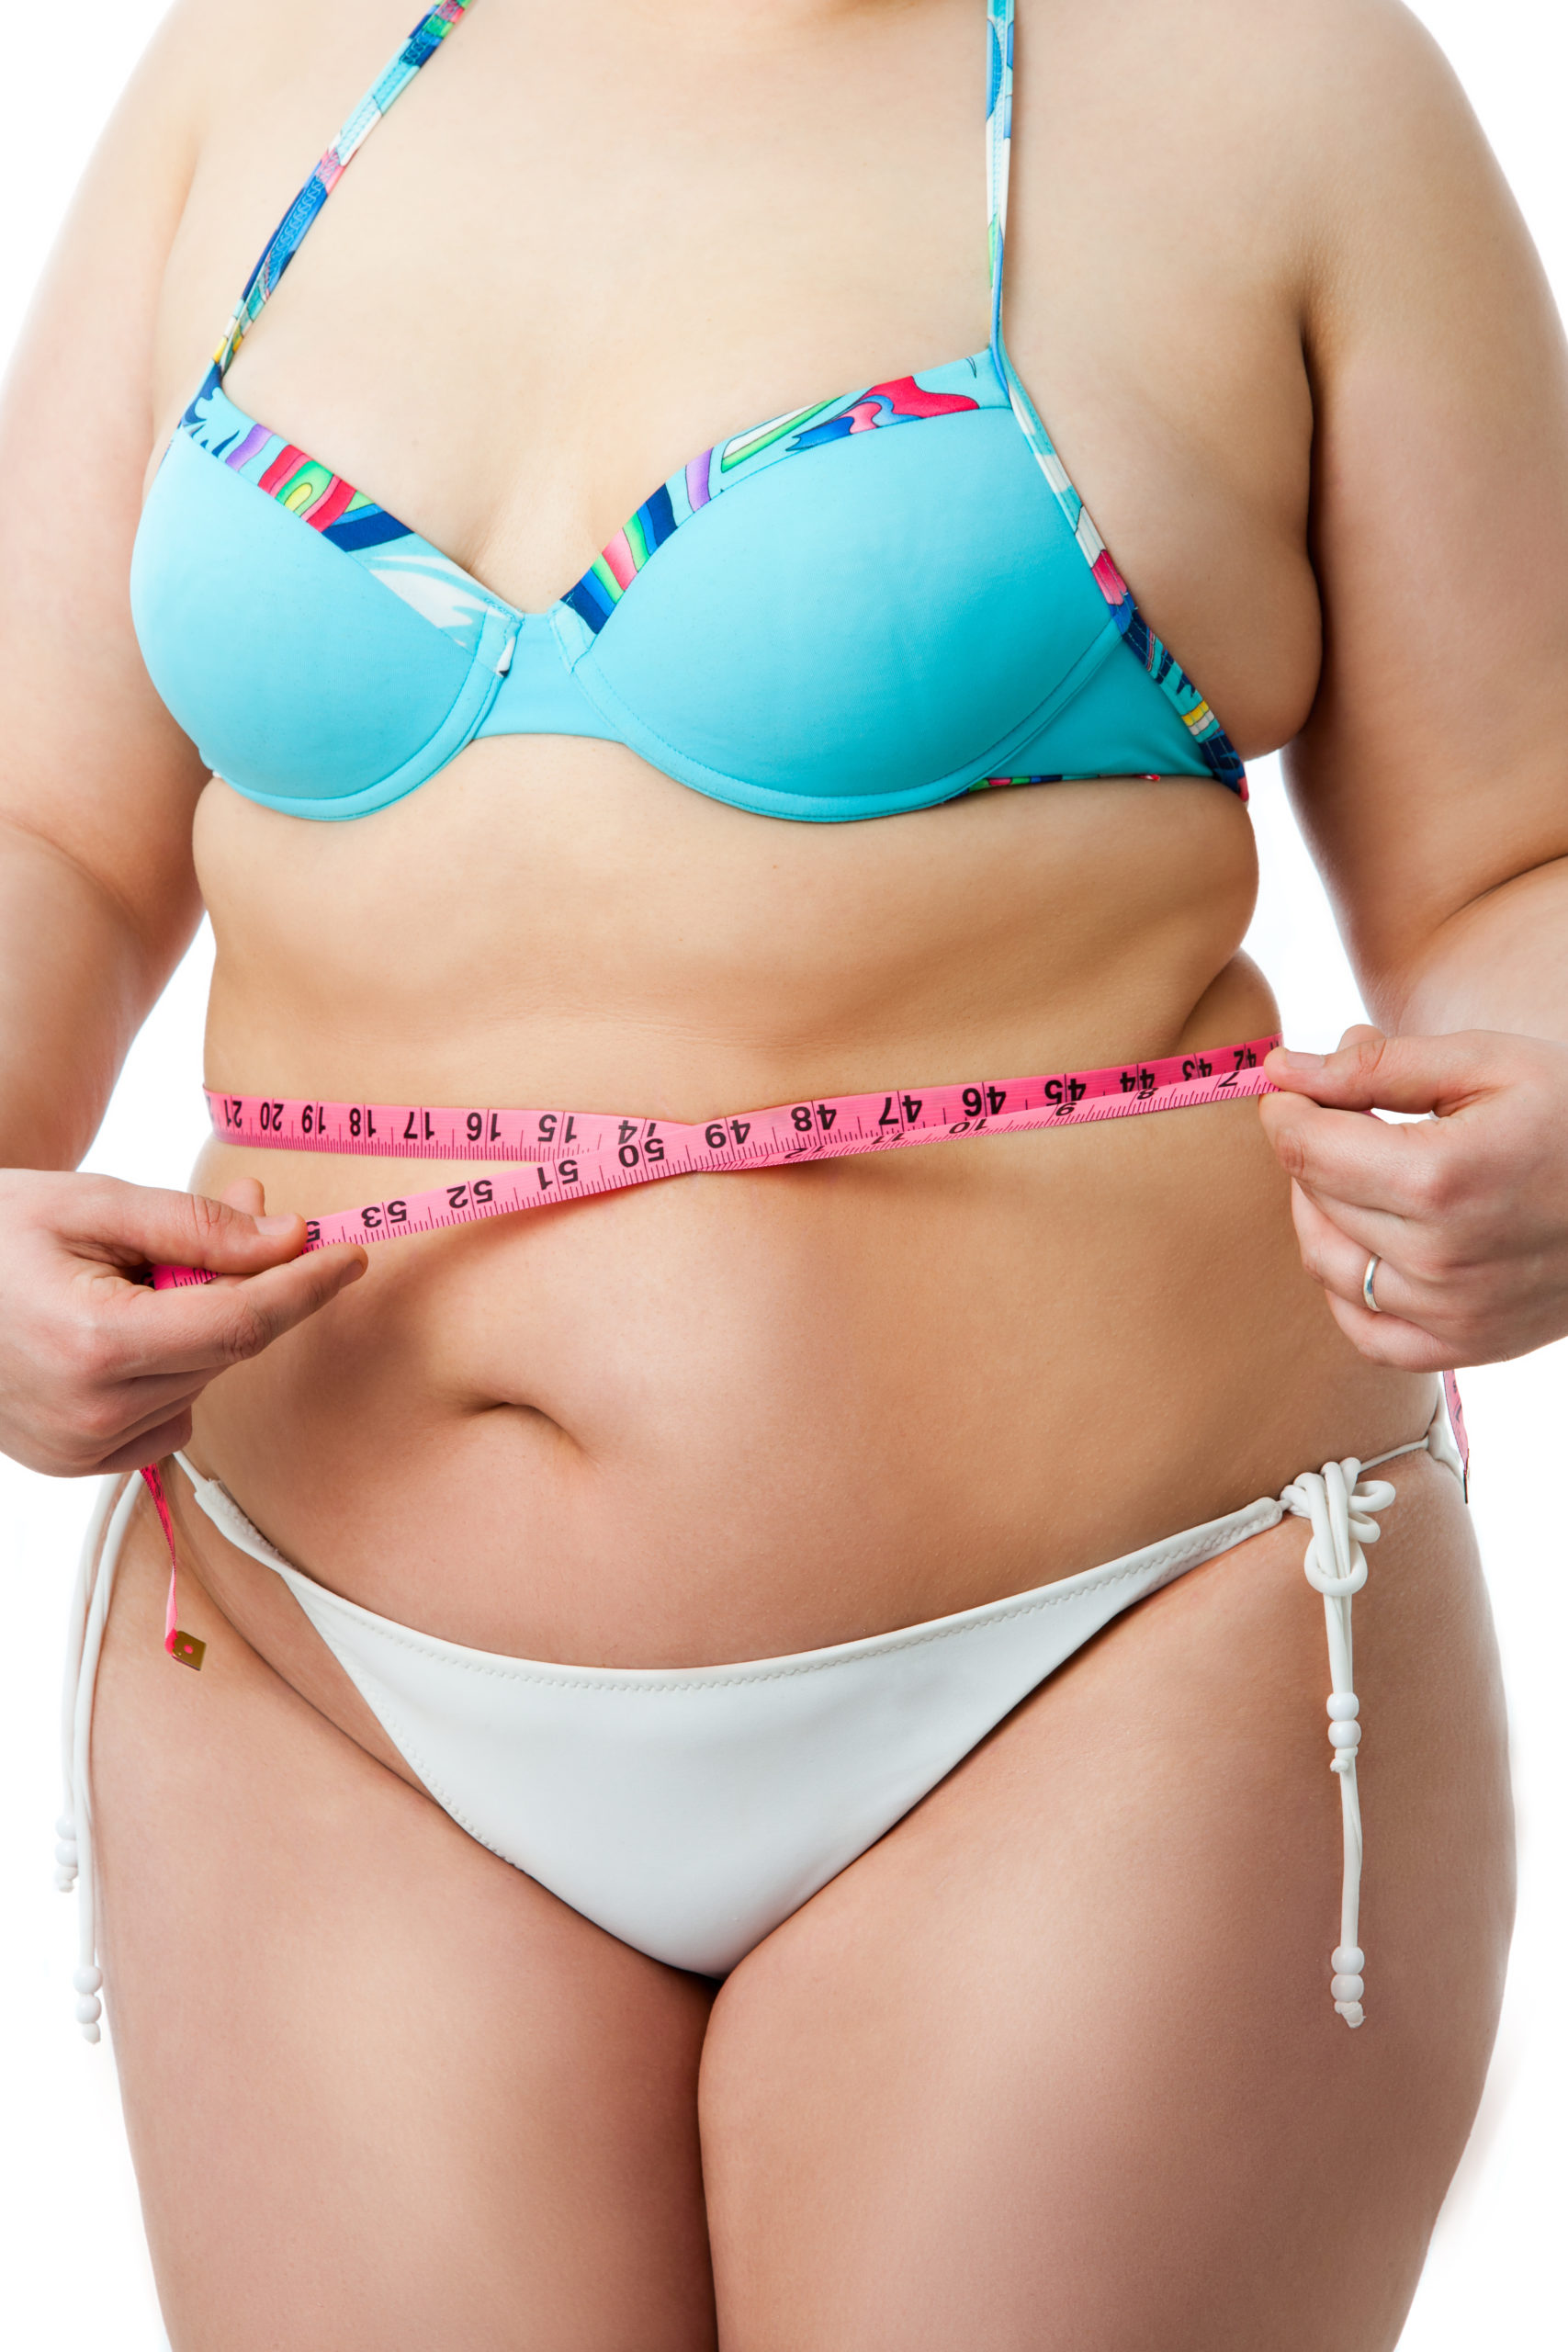 What To Know About Drains And Tummy Tuck Surgery - Power Plastic